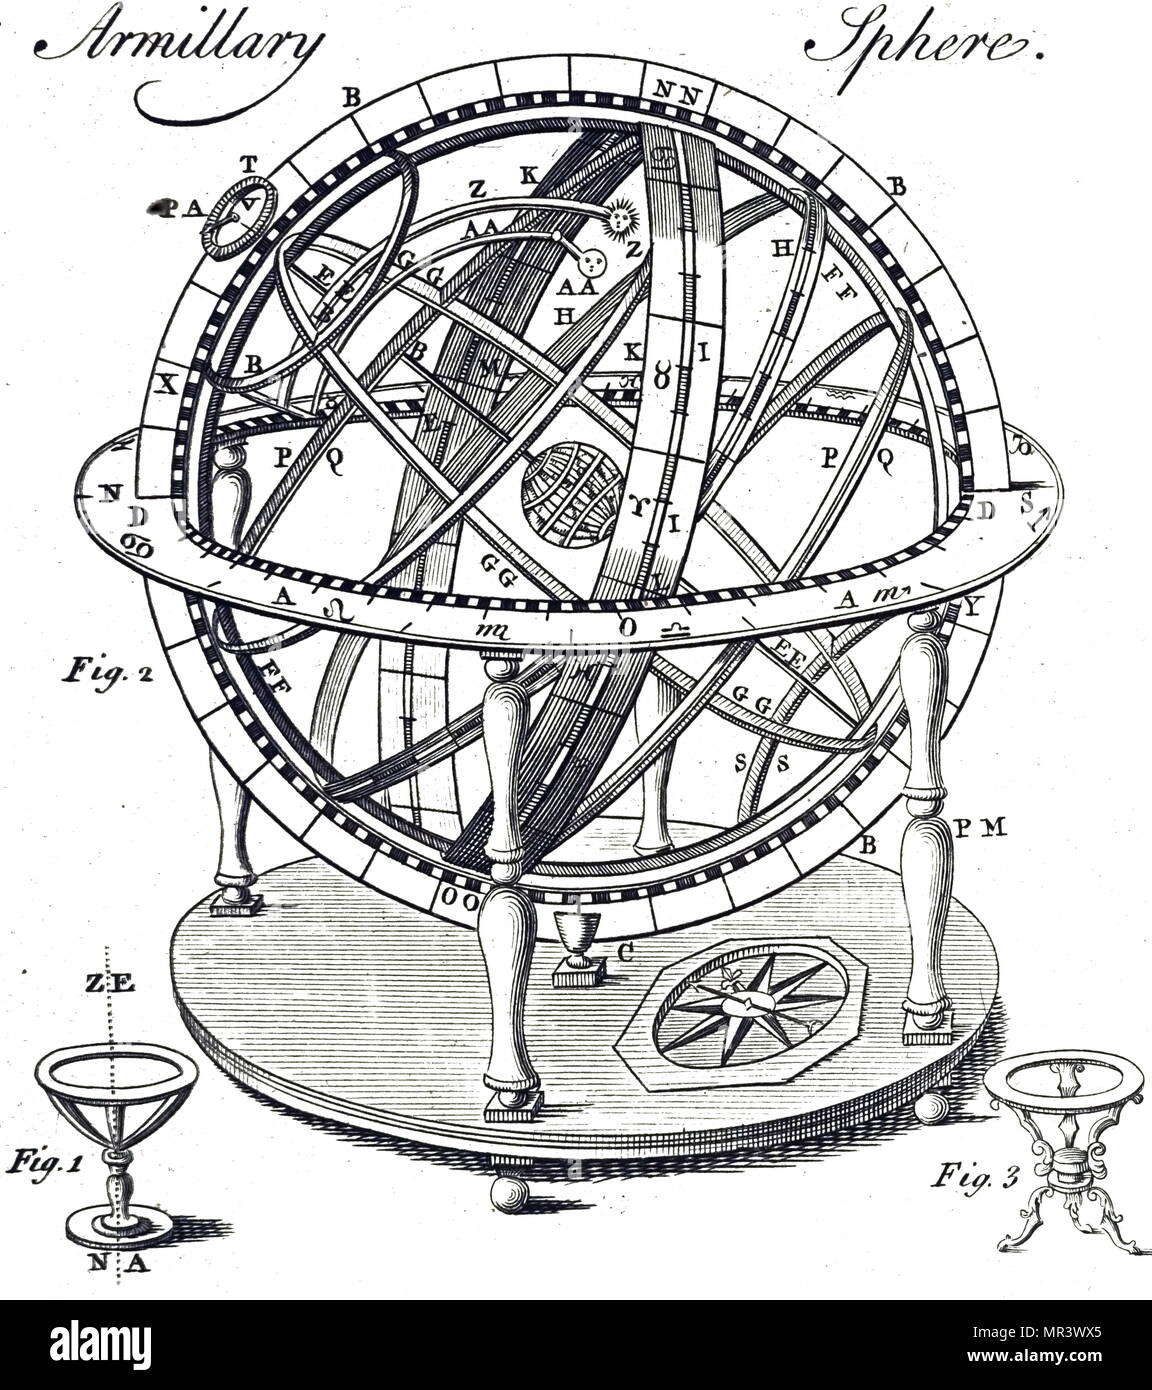 Engraving depicting an armillary sphere. An armillary sphere is a model of objects in the sky, consisting of a spherical framework of rings, centred on Earth or the Sun, that represent lines of celestial longitude and latitude. Dated 18th century Stock Photo